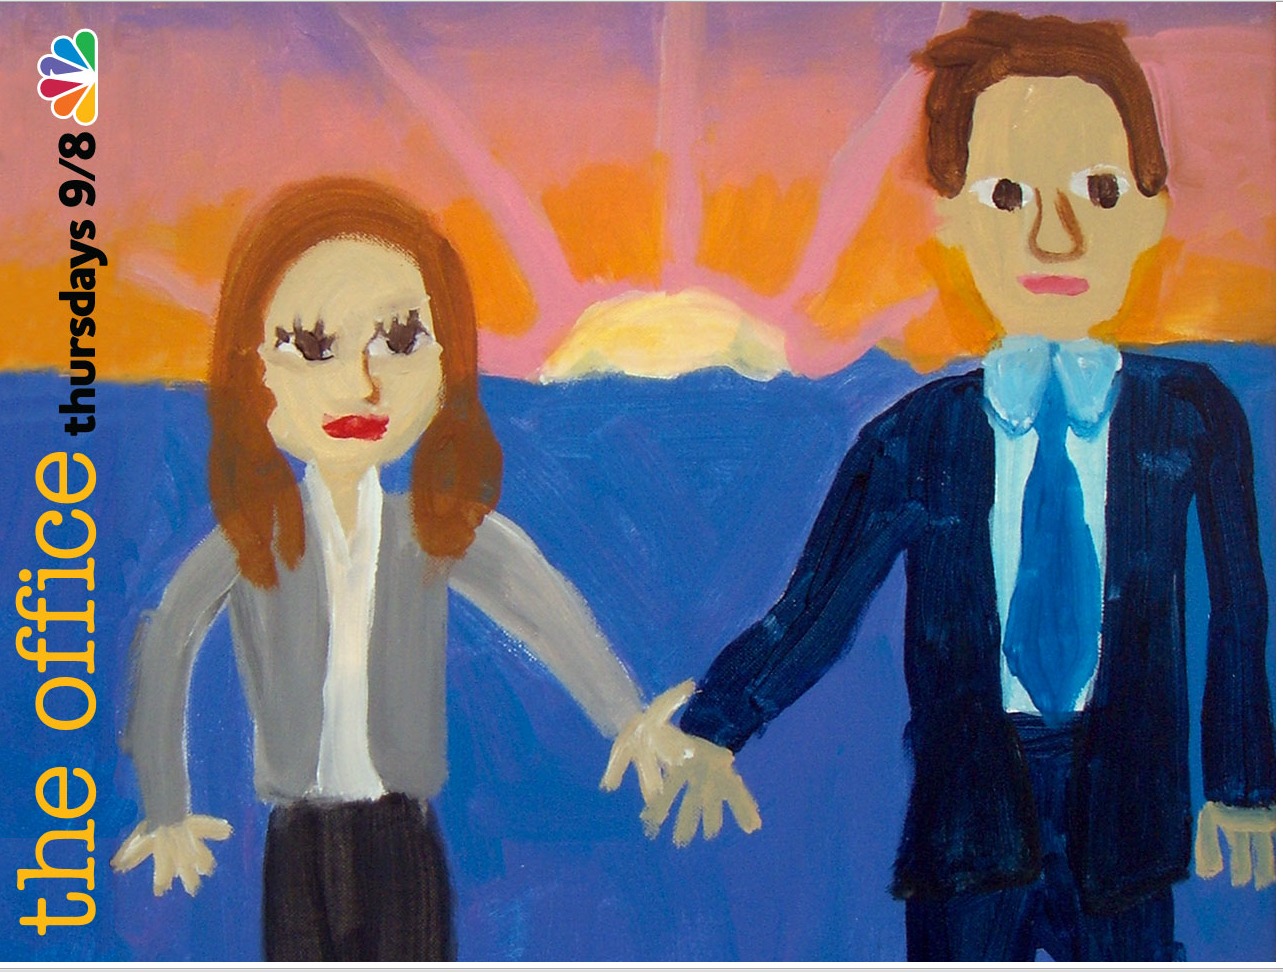 Michael's wedding present, portait of Jim and Pam from 